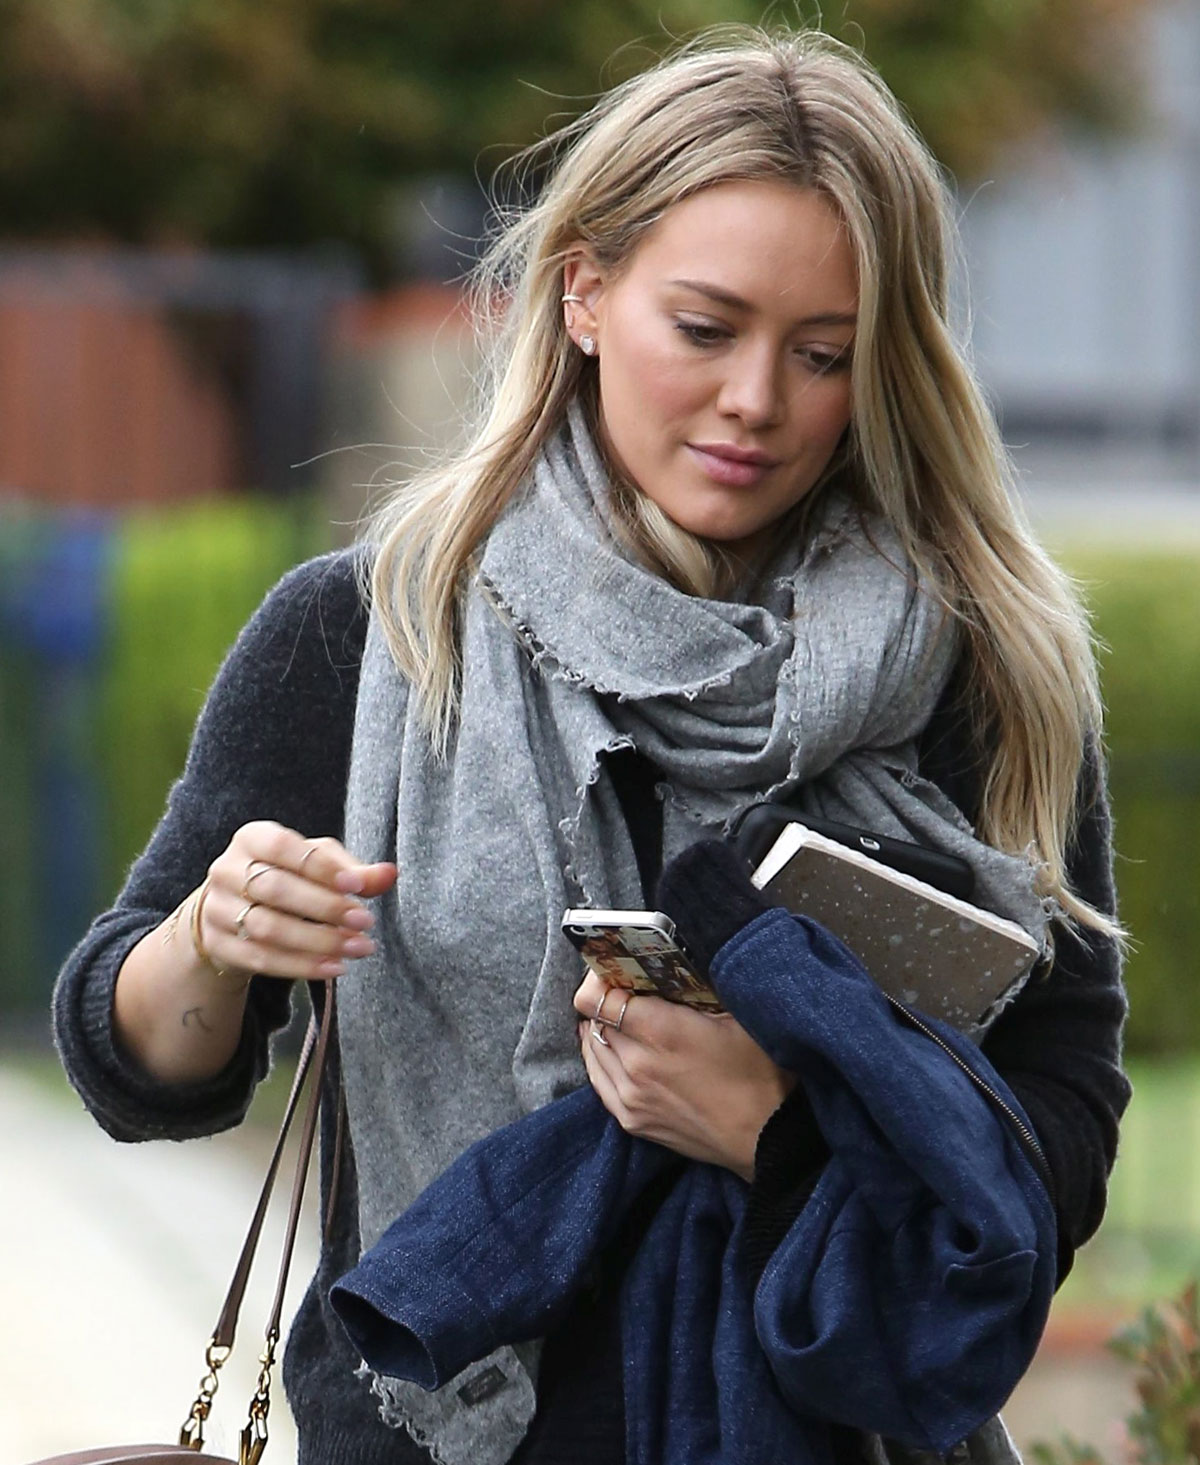 Hilary Duff was spotted while out in Beverly Hills